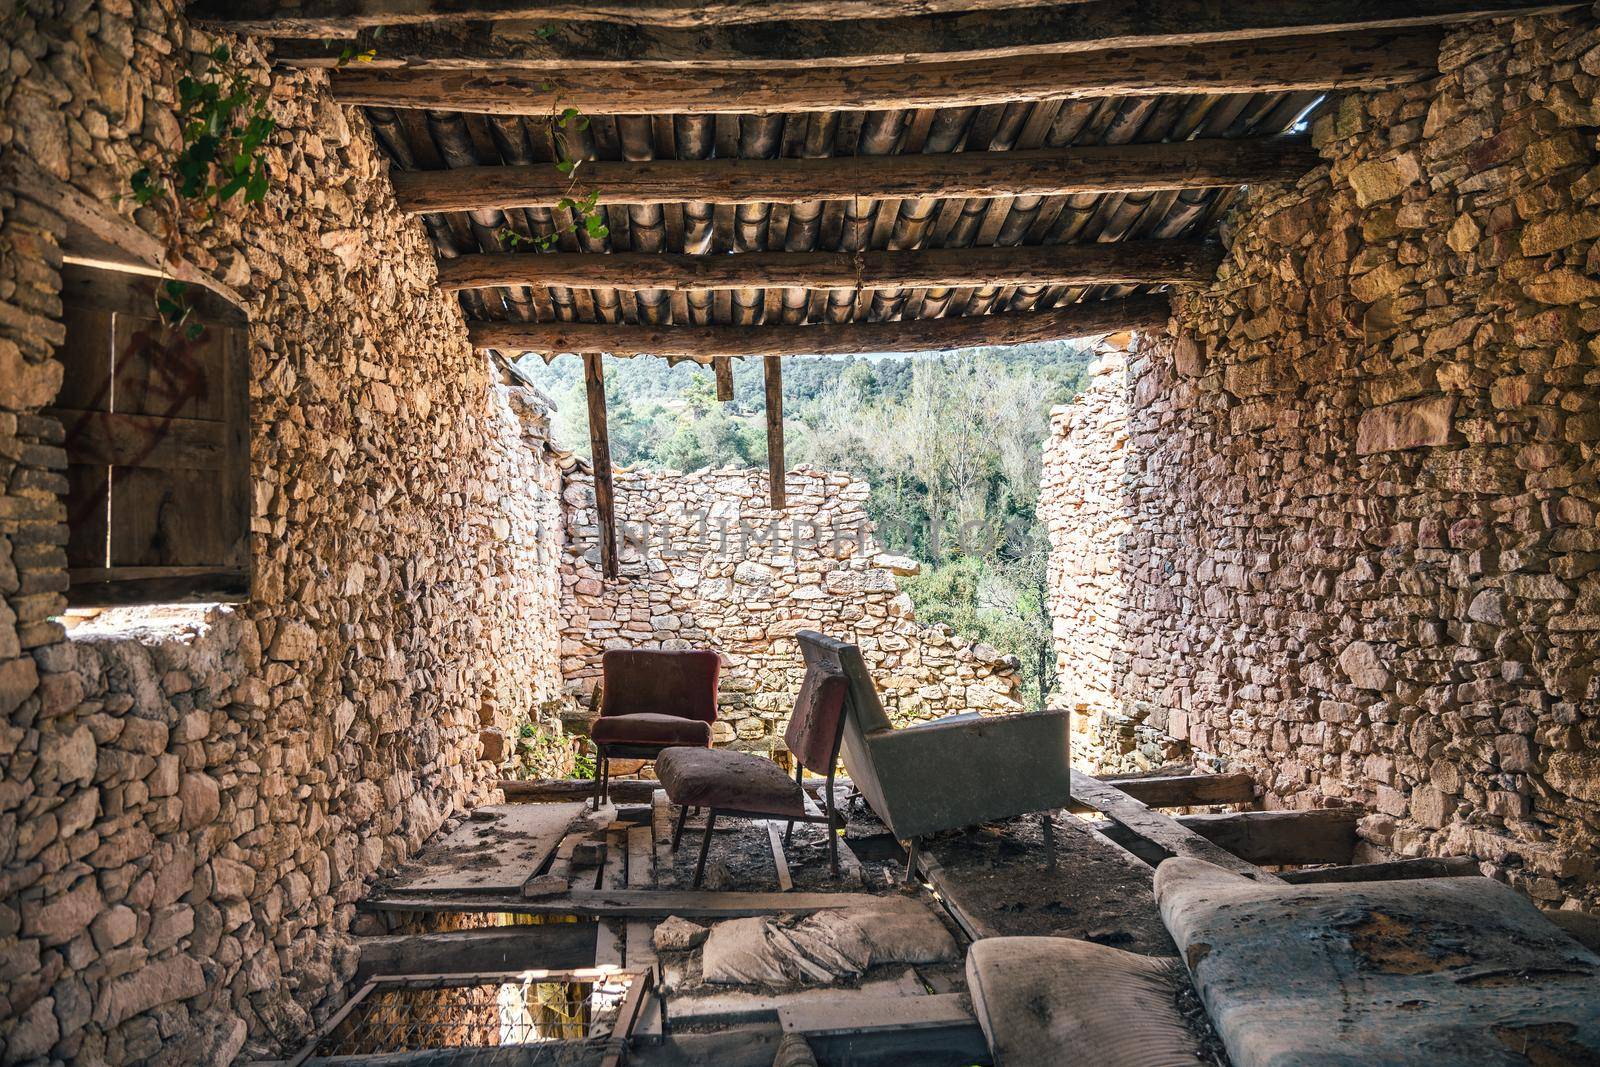 Abandoned stone house with wooden roof and broken wall with outside view. Ruin of ancient deserted building with old furniture. View from inside.